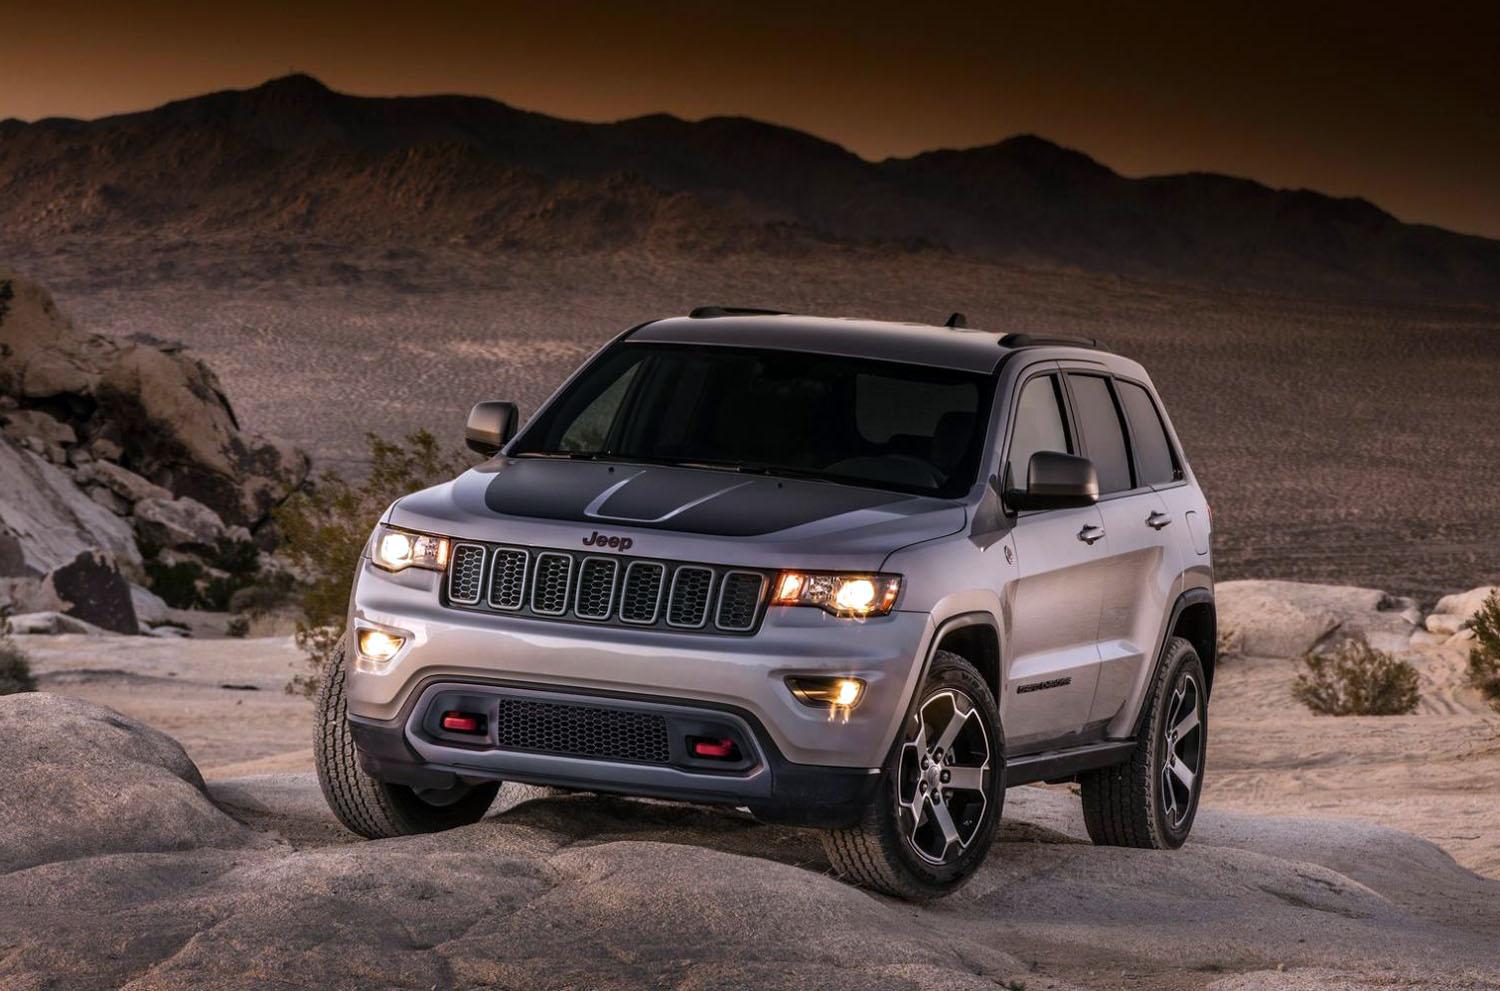 Jeep Cherokee Wallpapers 2K Photos, Wallpapers and other Wallpaper